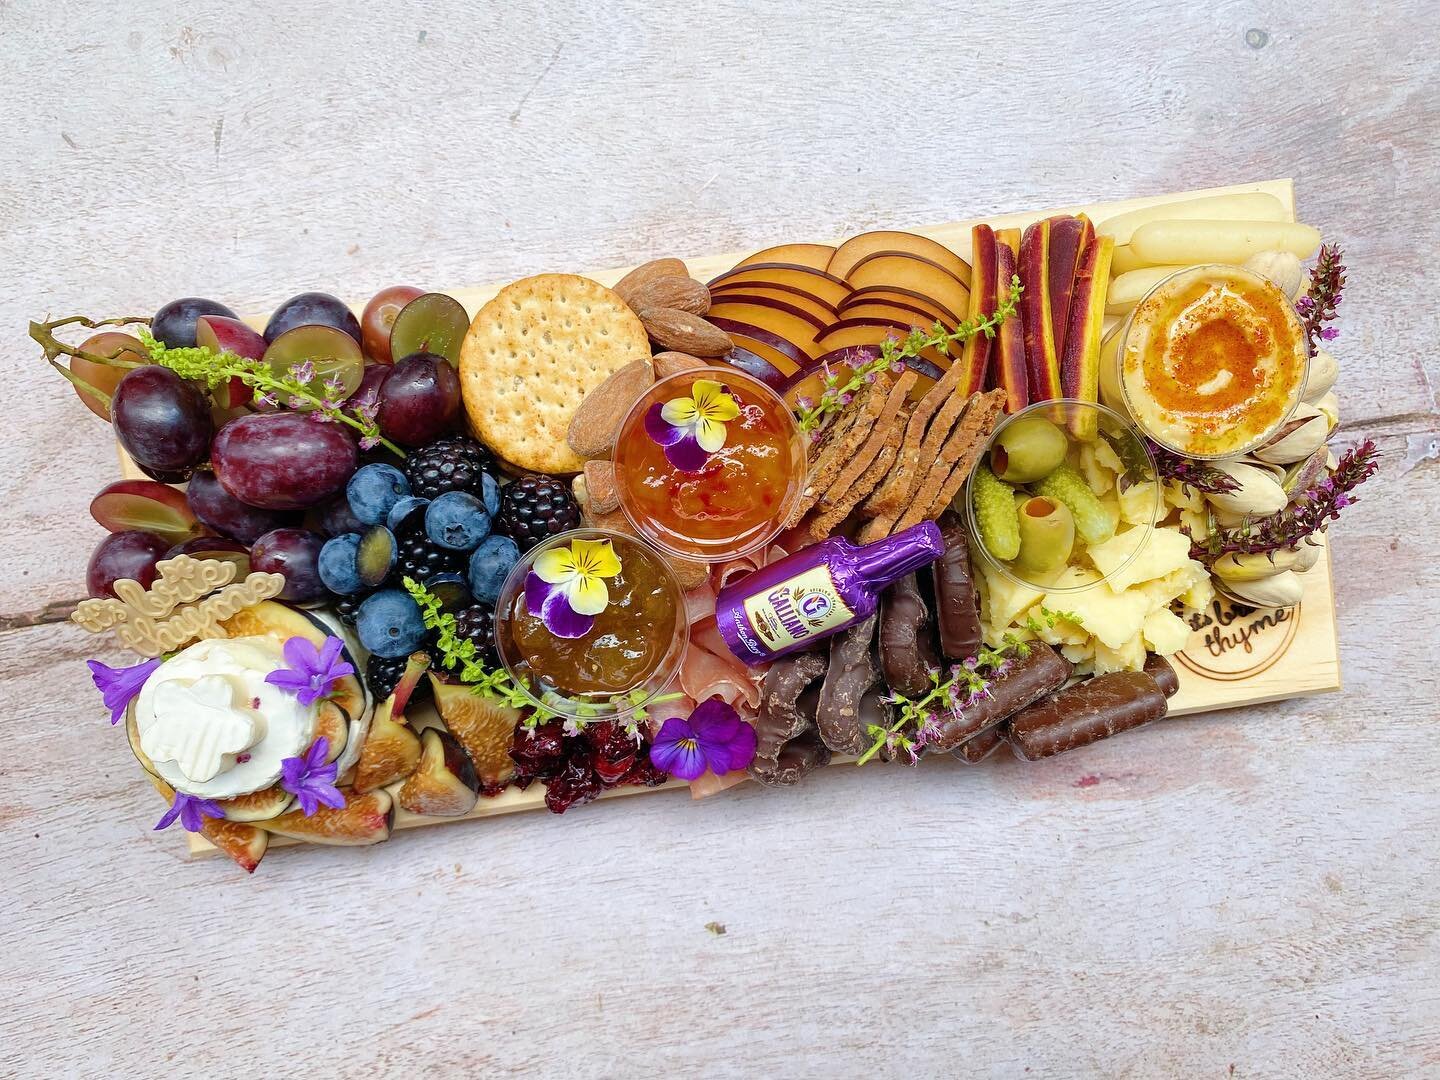 Only two more weekends of summer left!! 🥺 If you haven&rsquo;t had a summer picnic with one of our boards yet, text some friends and start making those plans! Dm us to place an order before the cold weather starts creeping in 🌬💜

(Pictured: Mini B